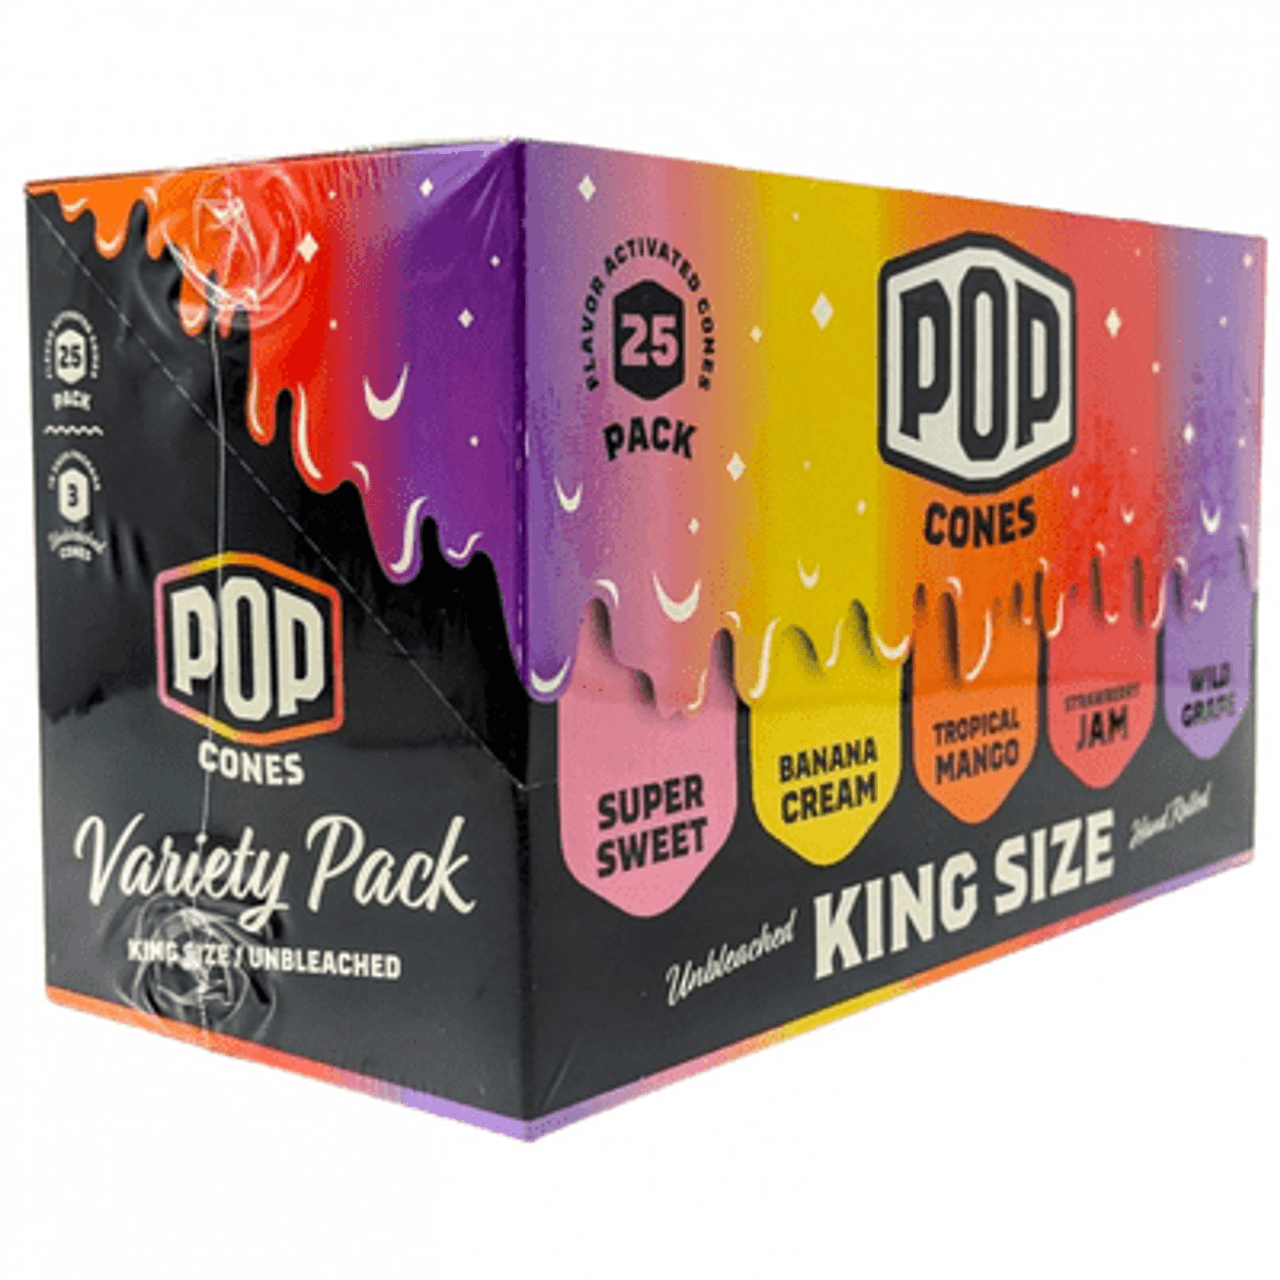 Pop Cones UNBLEACHED King Size Pre-Rolled Retail Cones | Variety Pack